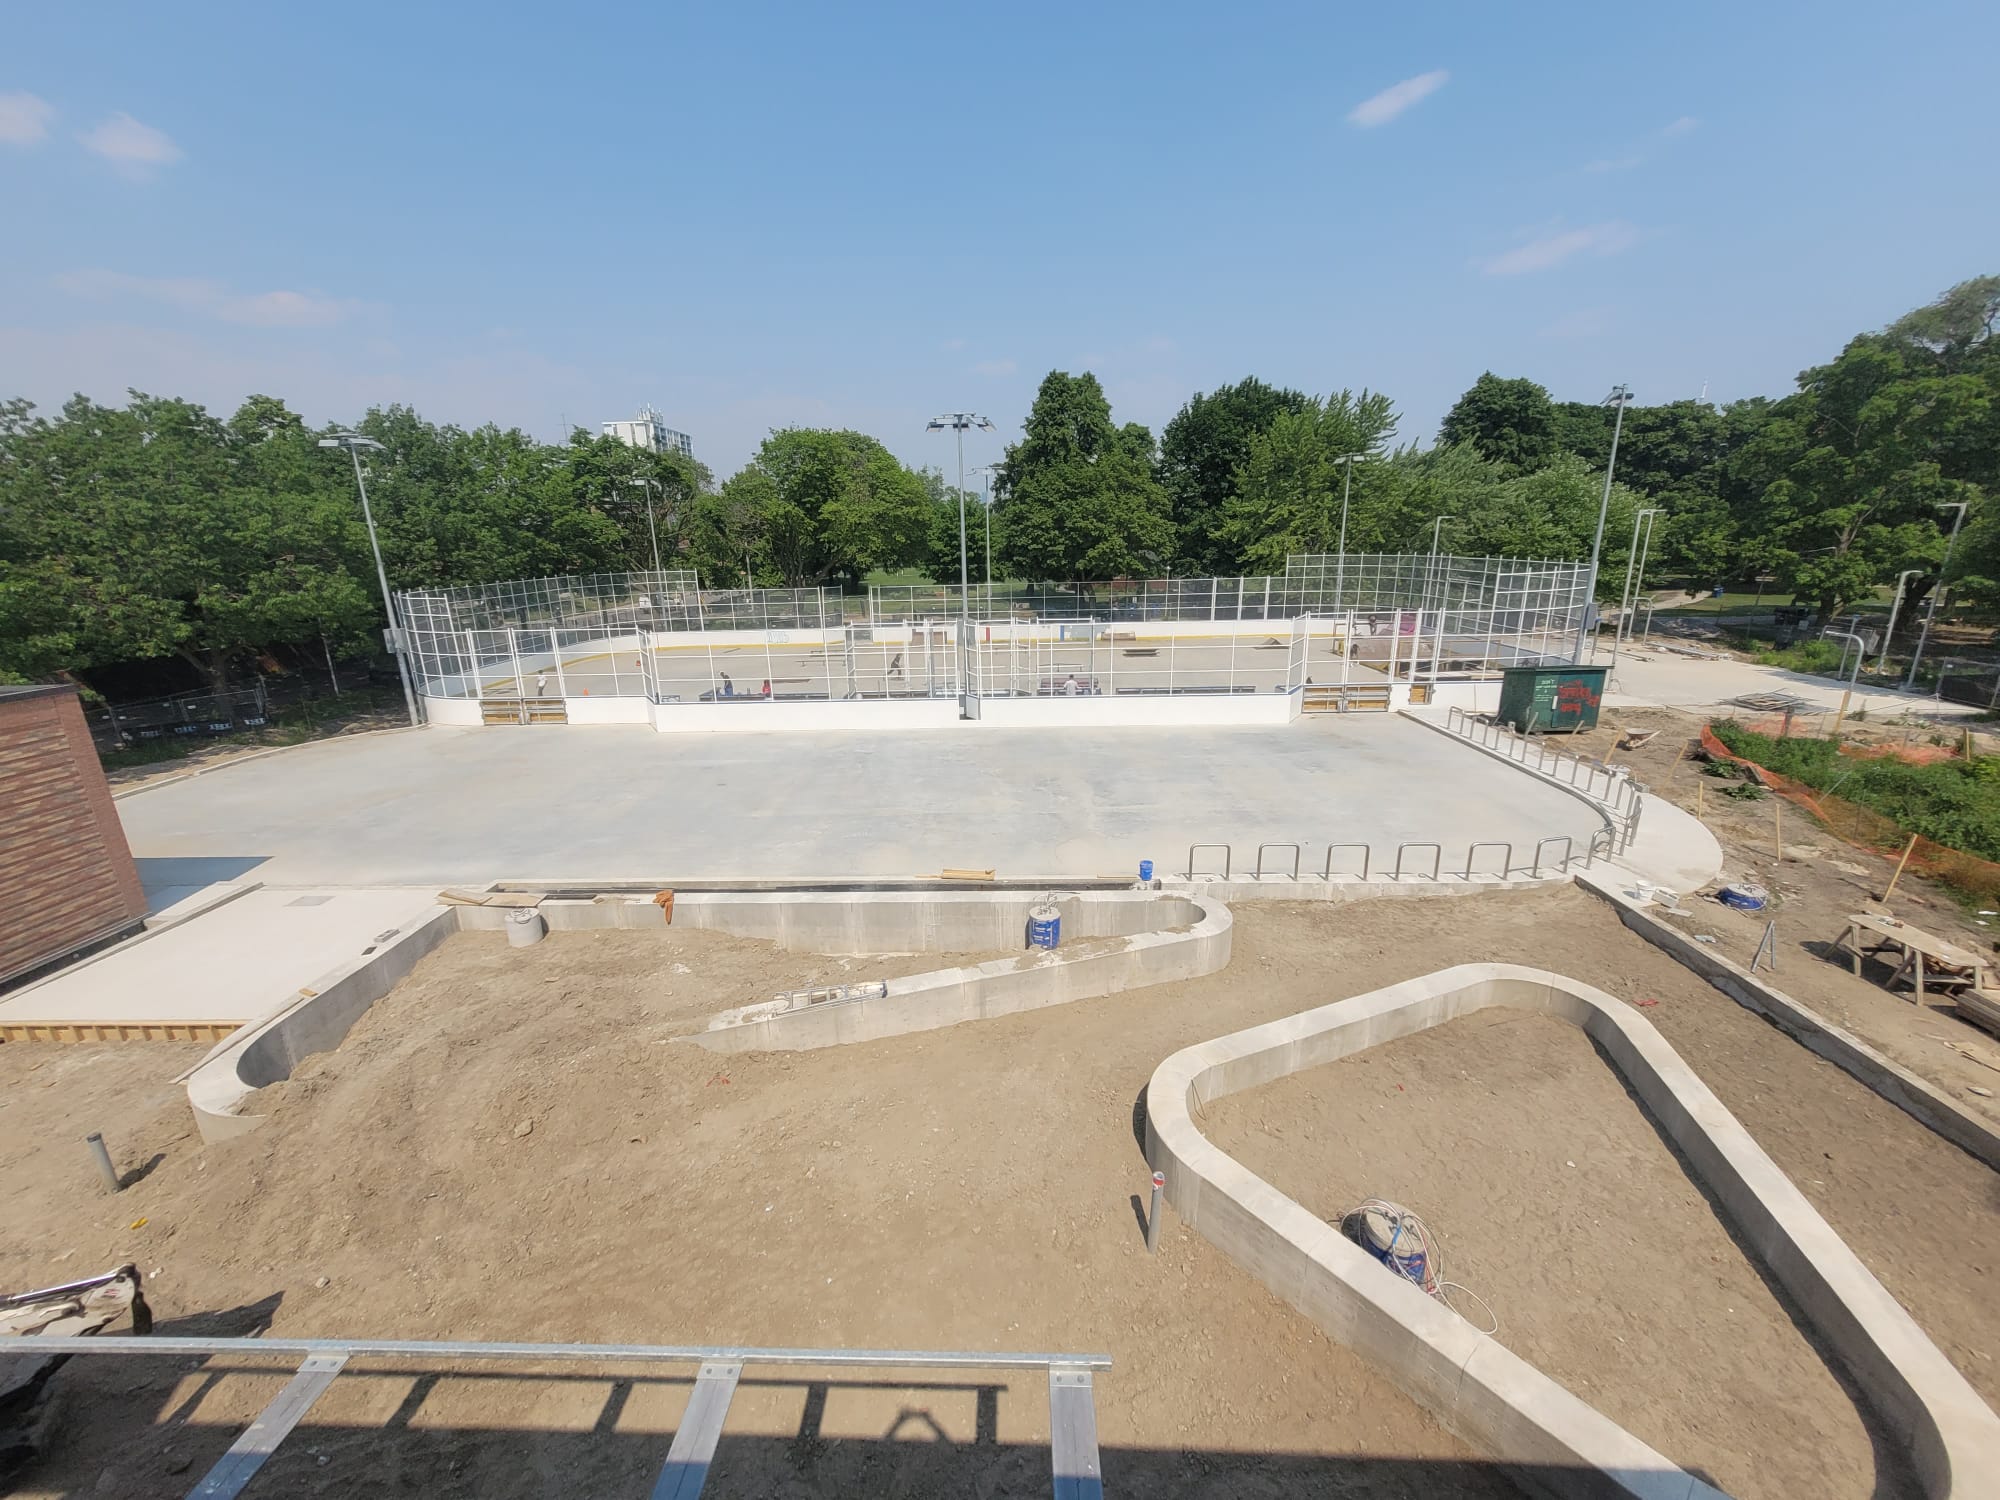 Photo taken from roof of Clubhouse looking down into area where new public plaza will be. The foundations for two large triangular planters have been excavated. The concrete around the planters is completed. 